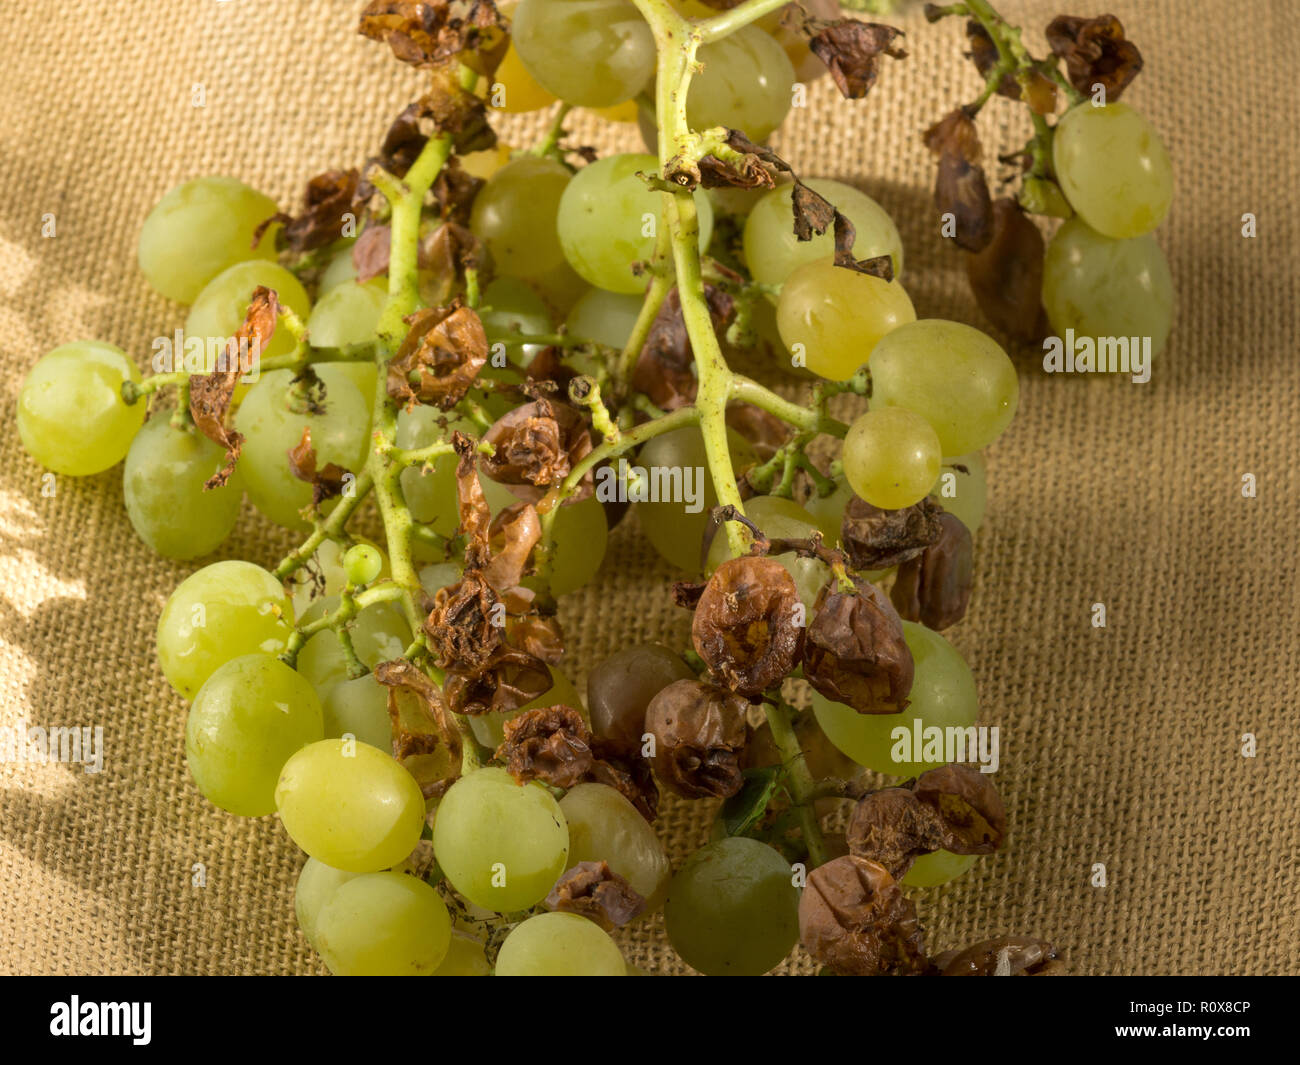 Green grapes. Variety Semillon. Damaged by feeding Bees,Flies,and Hornets:including the Asiatic Hornet.Also with some help from the Blackbirds. Stock Photo